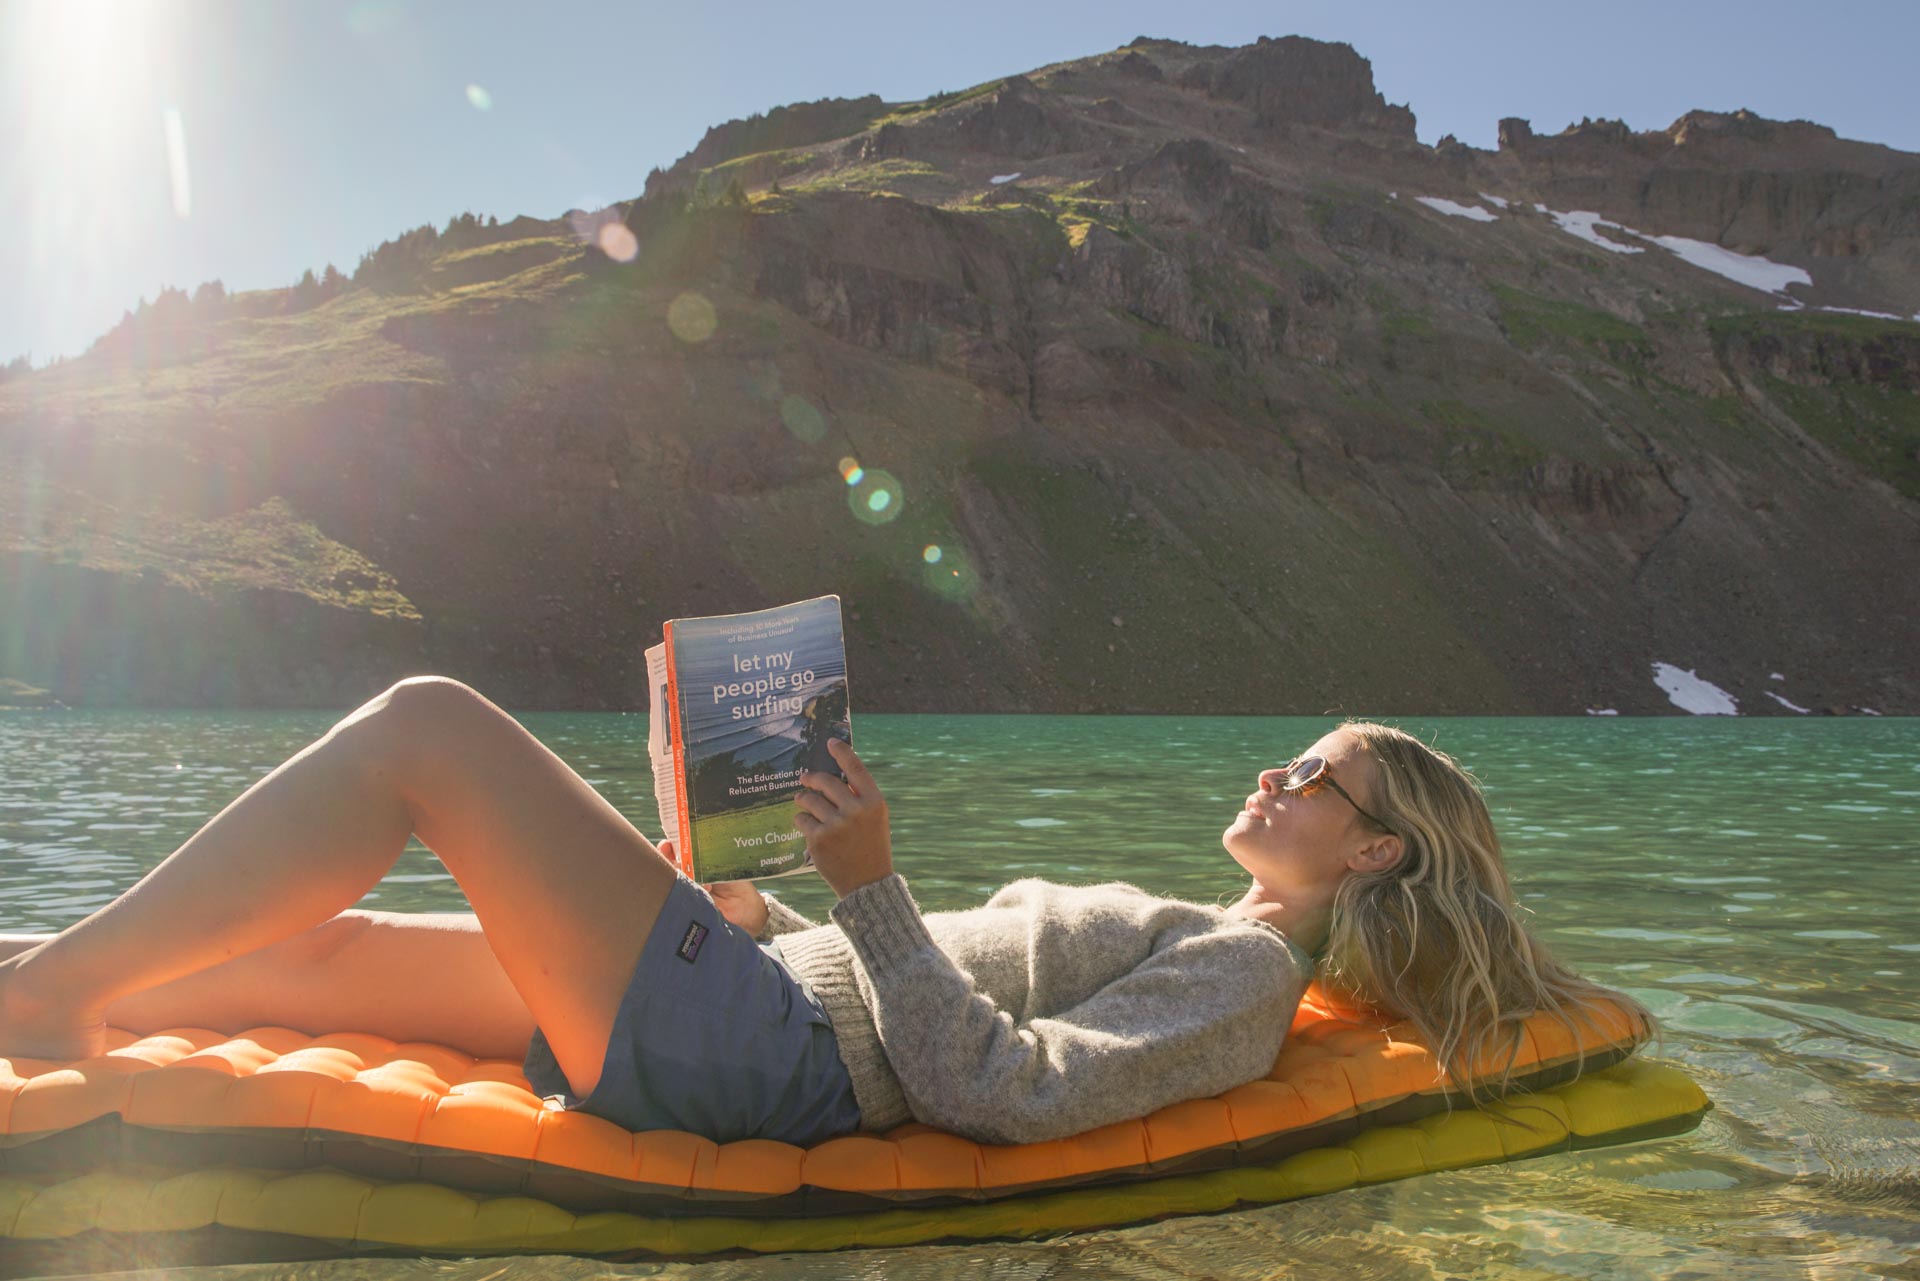 viale_tortoise_brown Woman floating in a lake reading a book wearing Ombraz viale unisex armless string sunglasses